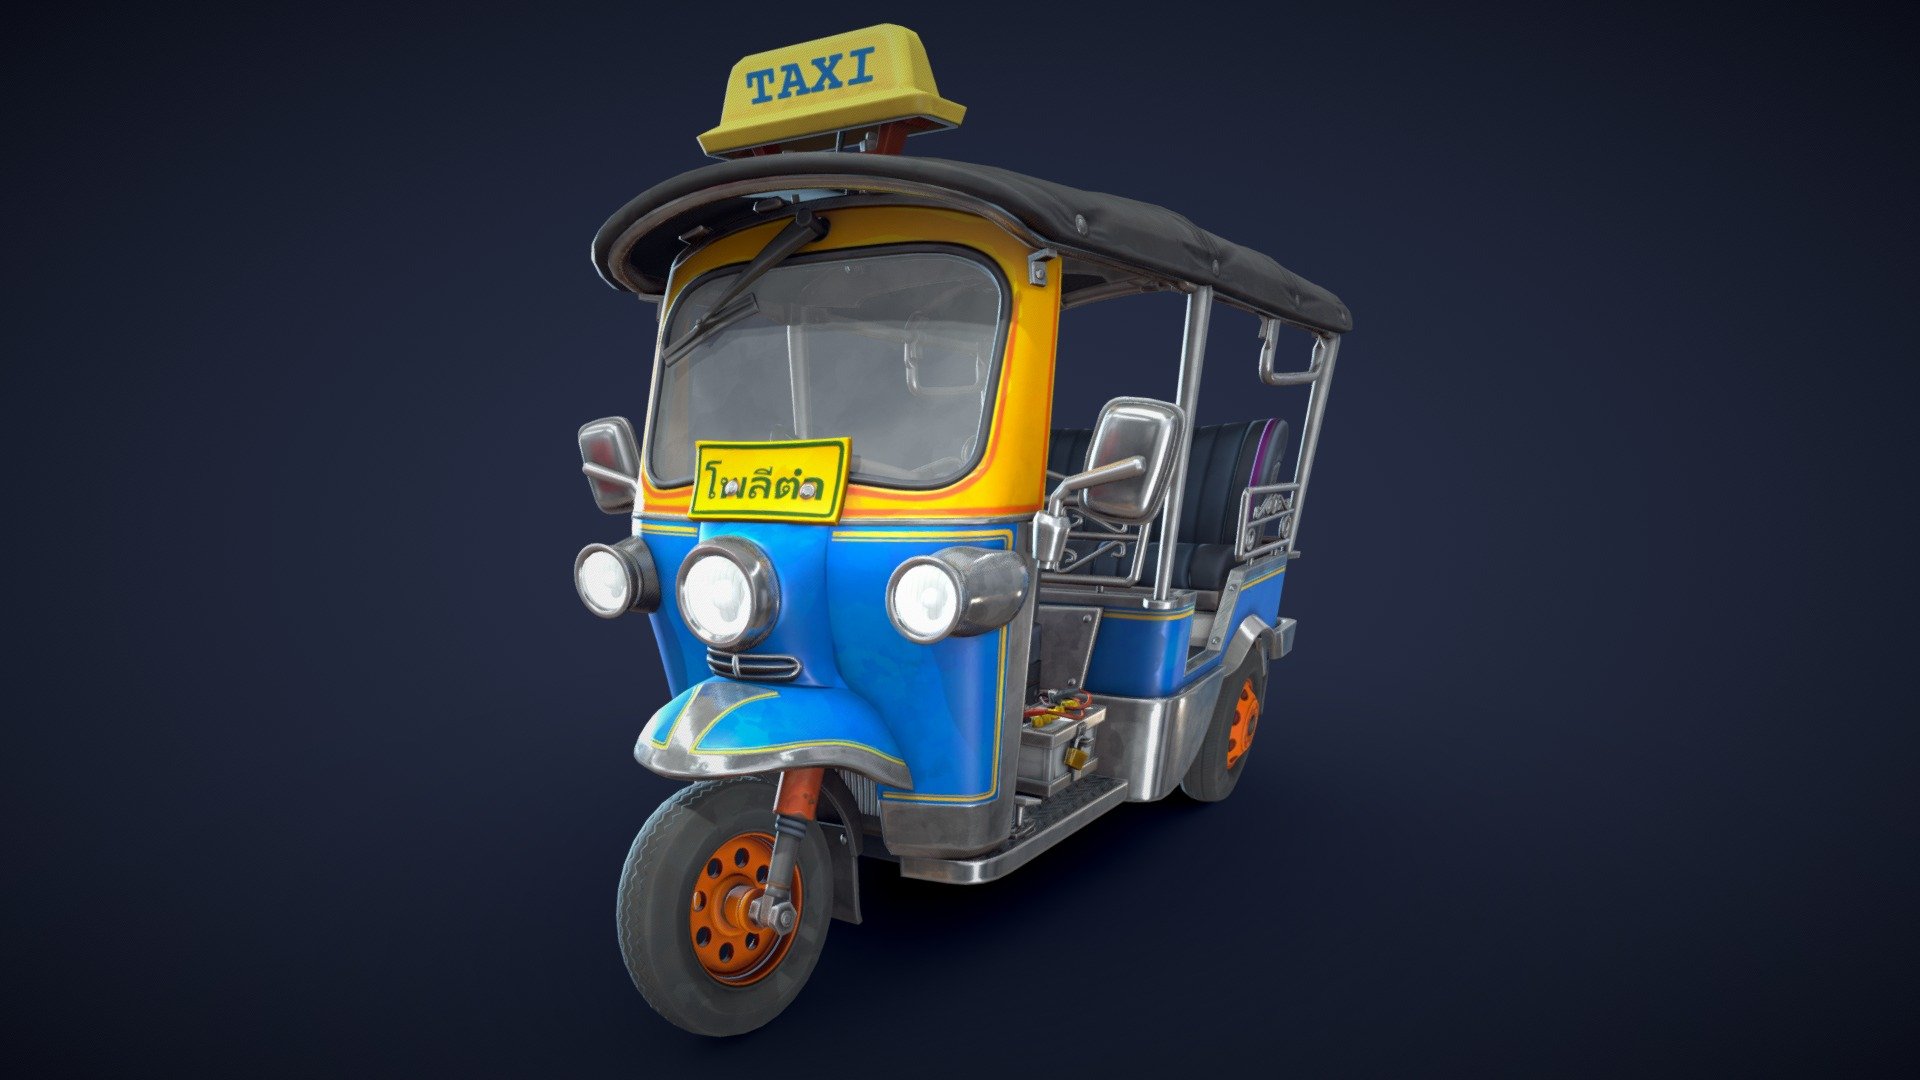 A stylized Tuk Tuk based on the auto-rickshaw taxis often seen in Bangkok, Thailand.
This model is optimized for realtime usage. The steering wheel mechanism is modelled and can be animated.

Model information:




Additional unposed Tuk Tuk model for animation is included

4k and 2k PBR textures for the Tuk Tuk are included.

2K and 1K PBR textures for the glas are included.

Optimized and clean UV mapping.

Compatible with Unreal Engine and Unity

Here is a look at the unposed Tuk Tuk mesh included in this purchase:
 - Stylized Tuk Tuk - Low Poly - Buy Royalty Free 3D model by Lars Korden (@Lark.Art) 3d model